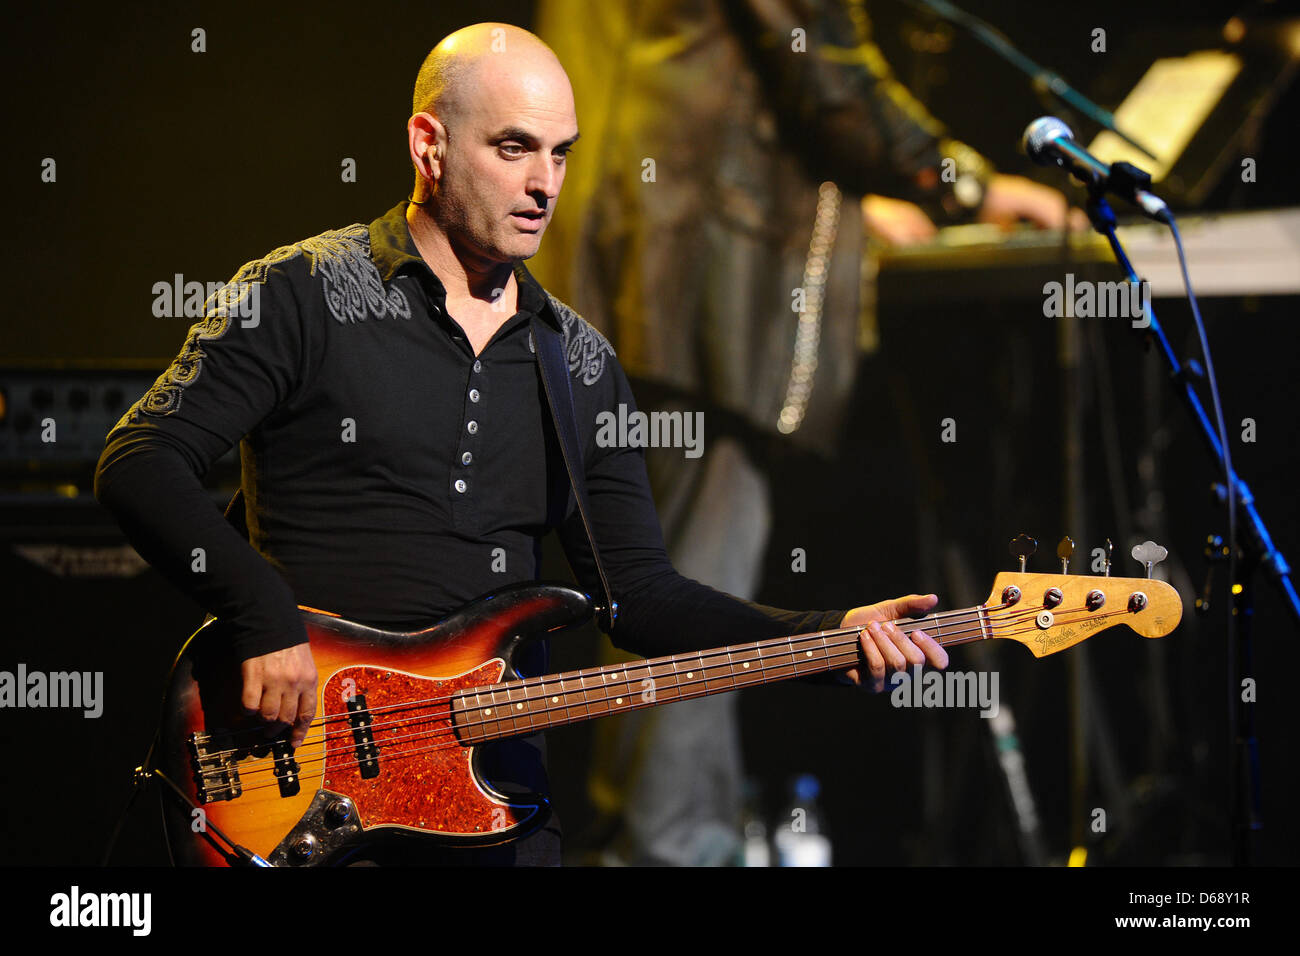 Bass player Guy Erez performs during a The Alan Parsons Live Project concert at Colosseum Theater in Essen, Germany, 20 July 2012. Photo: Revierfoto Stock Photo